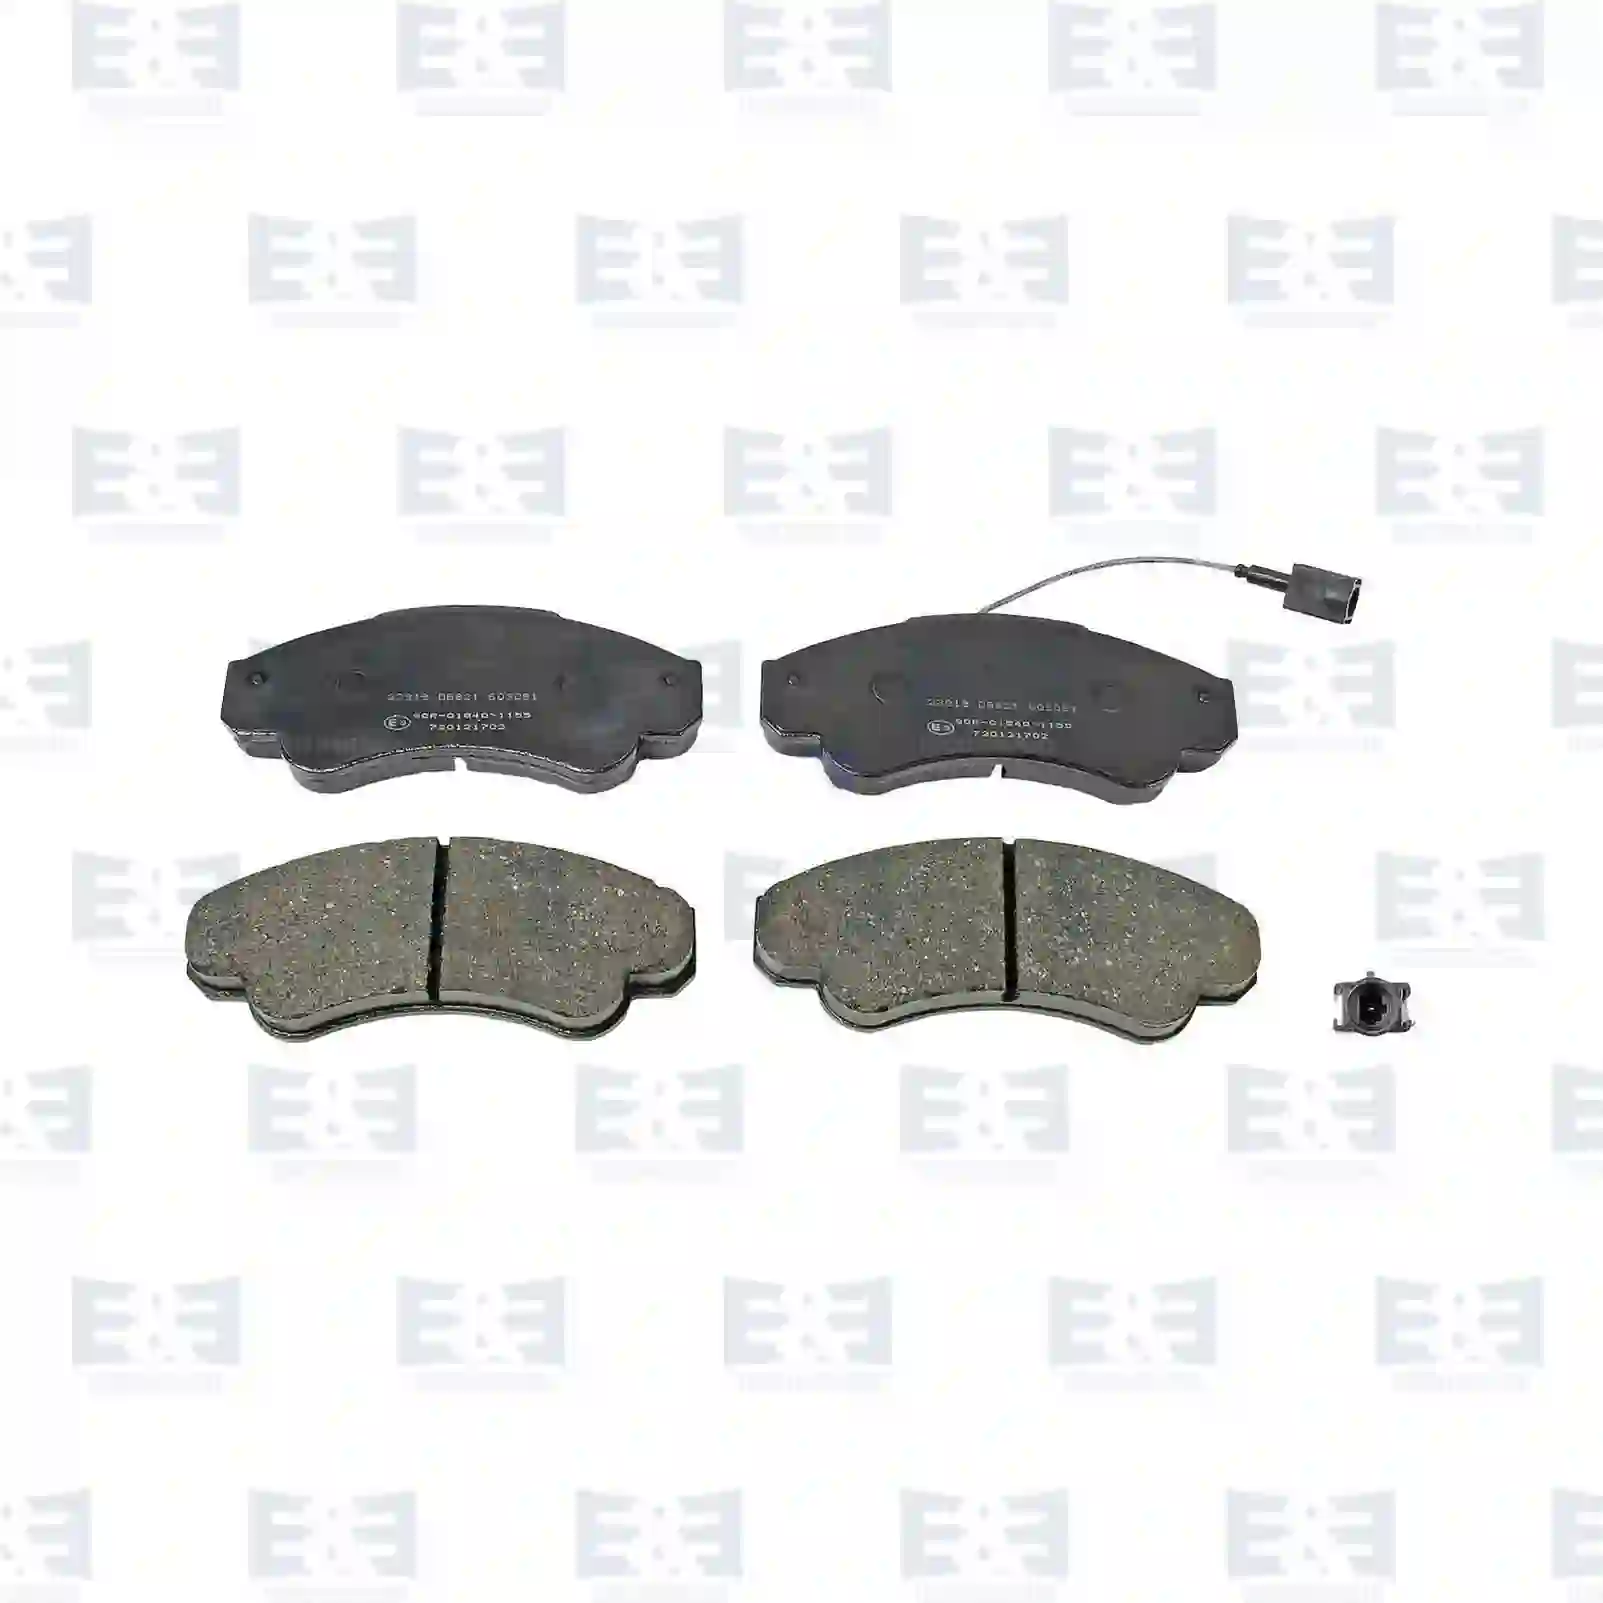 Brake Disc Disc brake pad kit, without accessories, EE No 2E2297481 ,  oem no:77362216, 77364859, 425244, 425245, 425459, 09949362, 09949517, 71752978, 71770070, 71772525, 77362216, 77364859, 9949362, 9949517, 77362216, 77364859, 425244, 425245, 425459 E&E Truck Spare Parts | Truck Spare Parts, Auotomotive Spare Parts